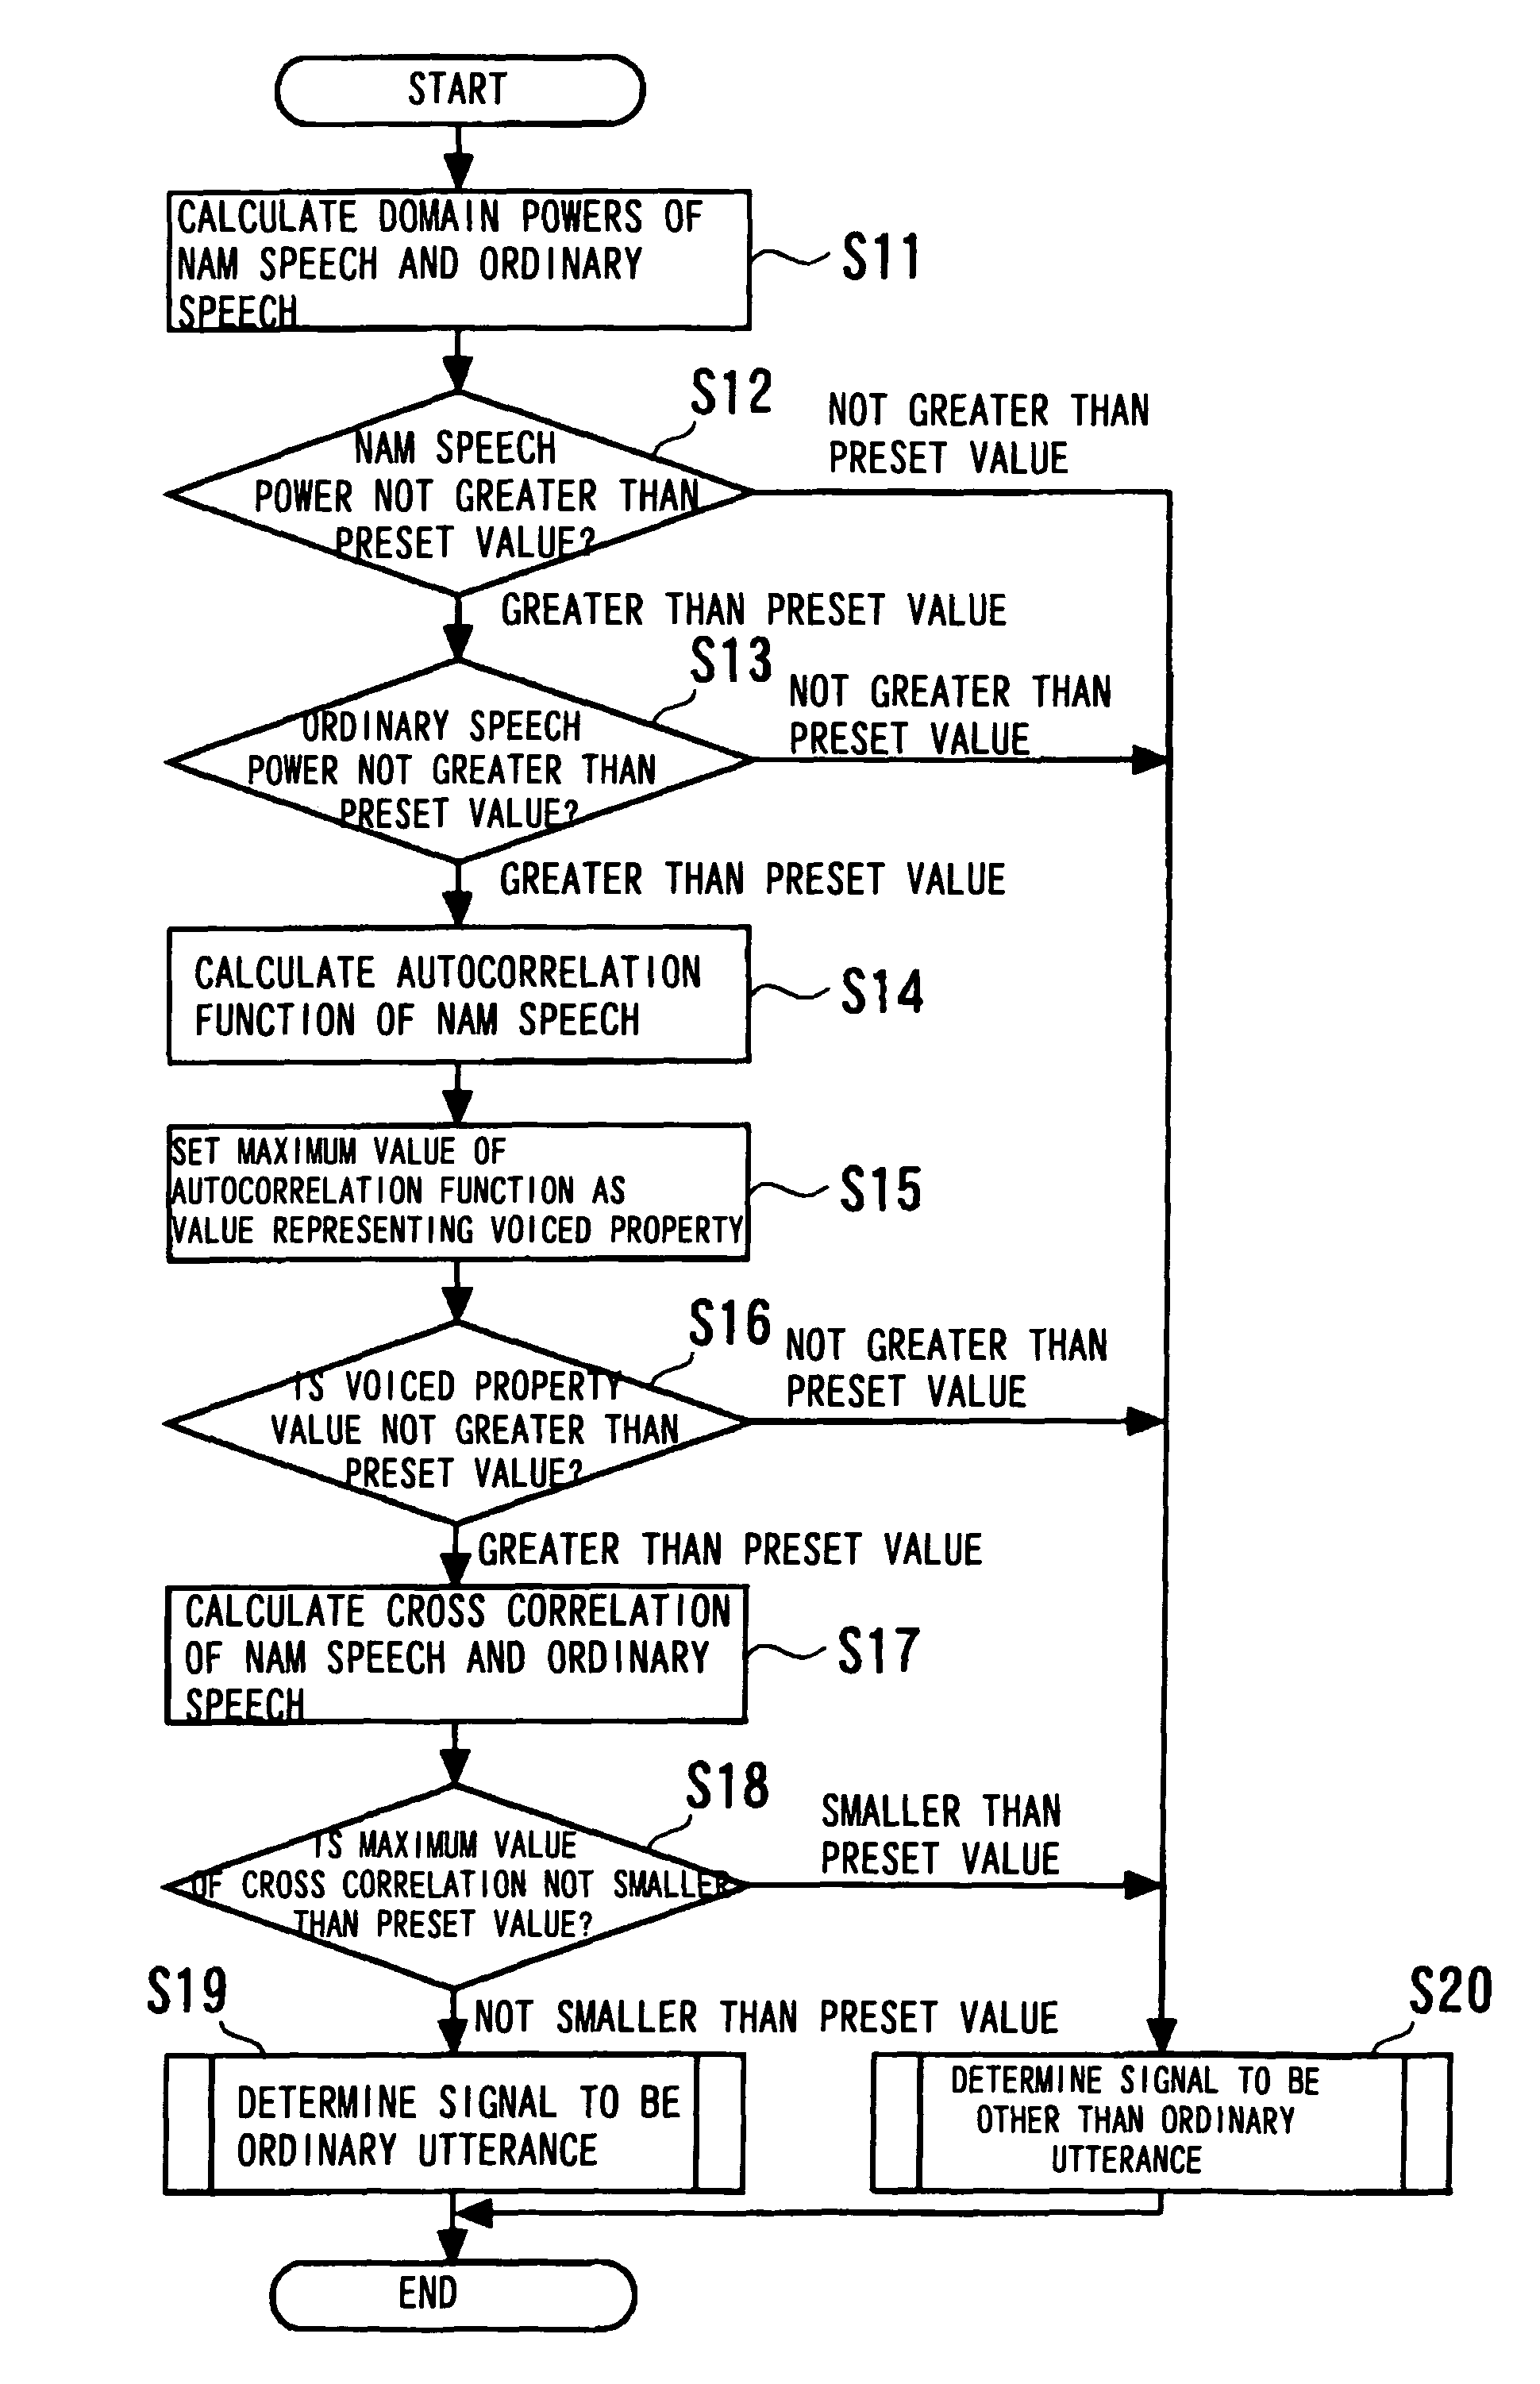 Apparatus, method and program for giving warning in connection with inputting of unvoiced speech